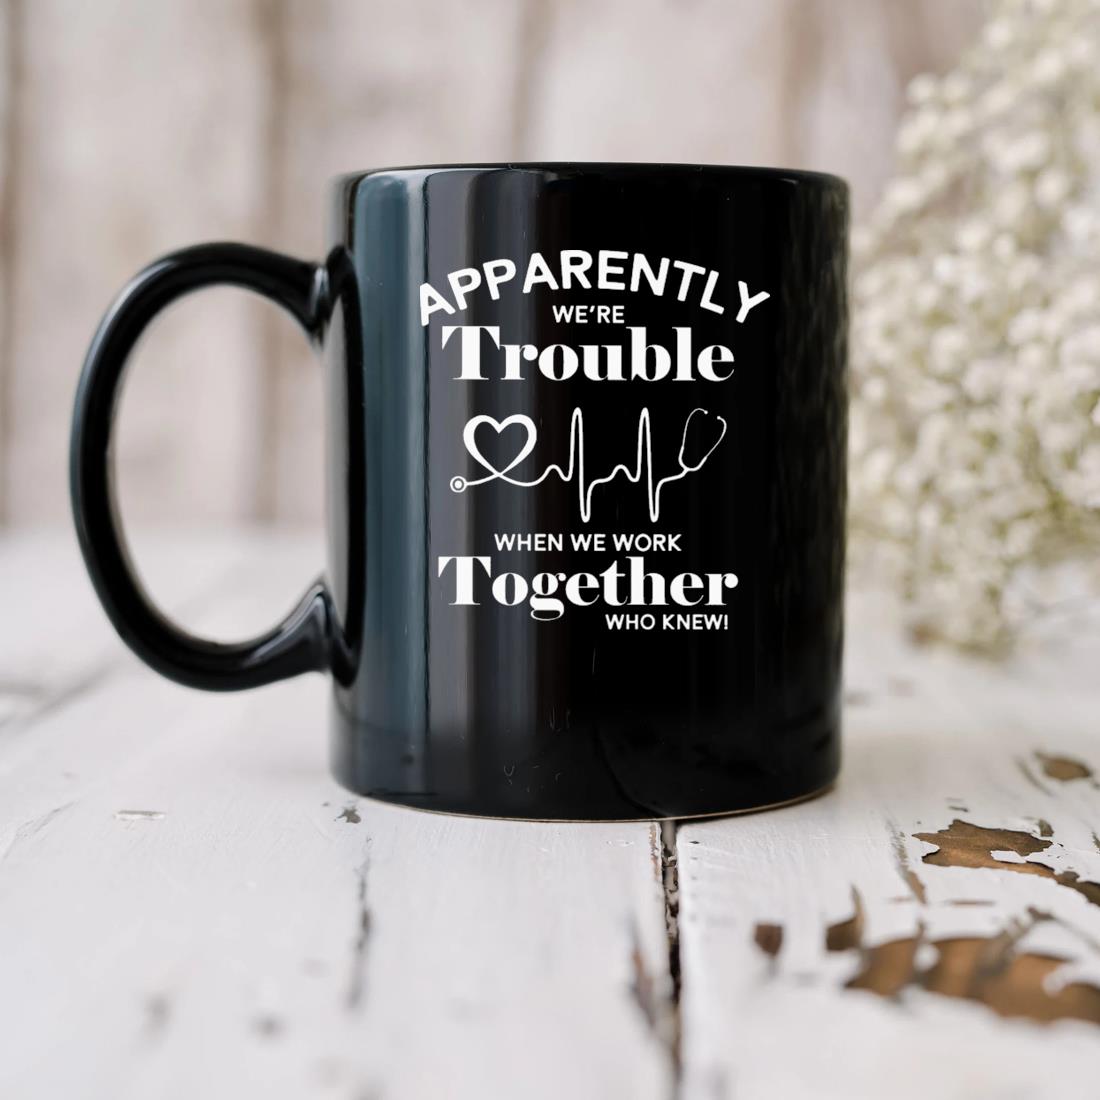 Apparently We're Trouble When We Work Together Who Knew Mug